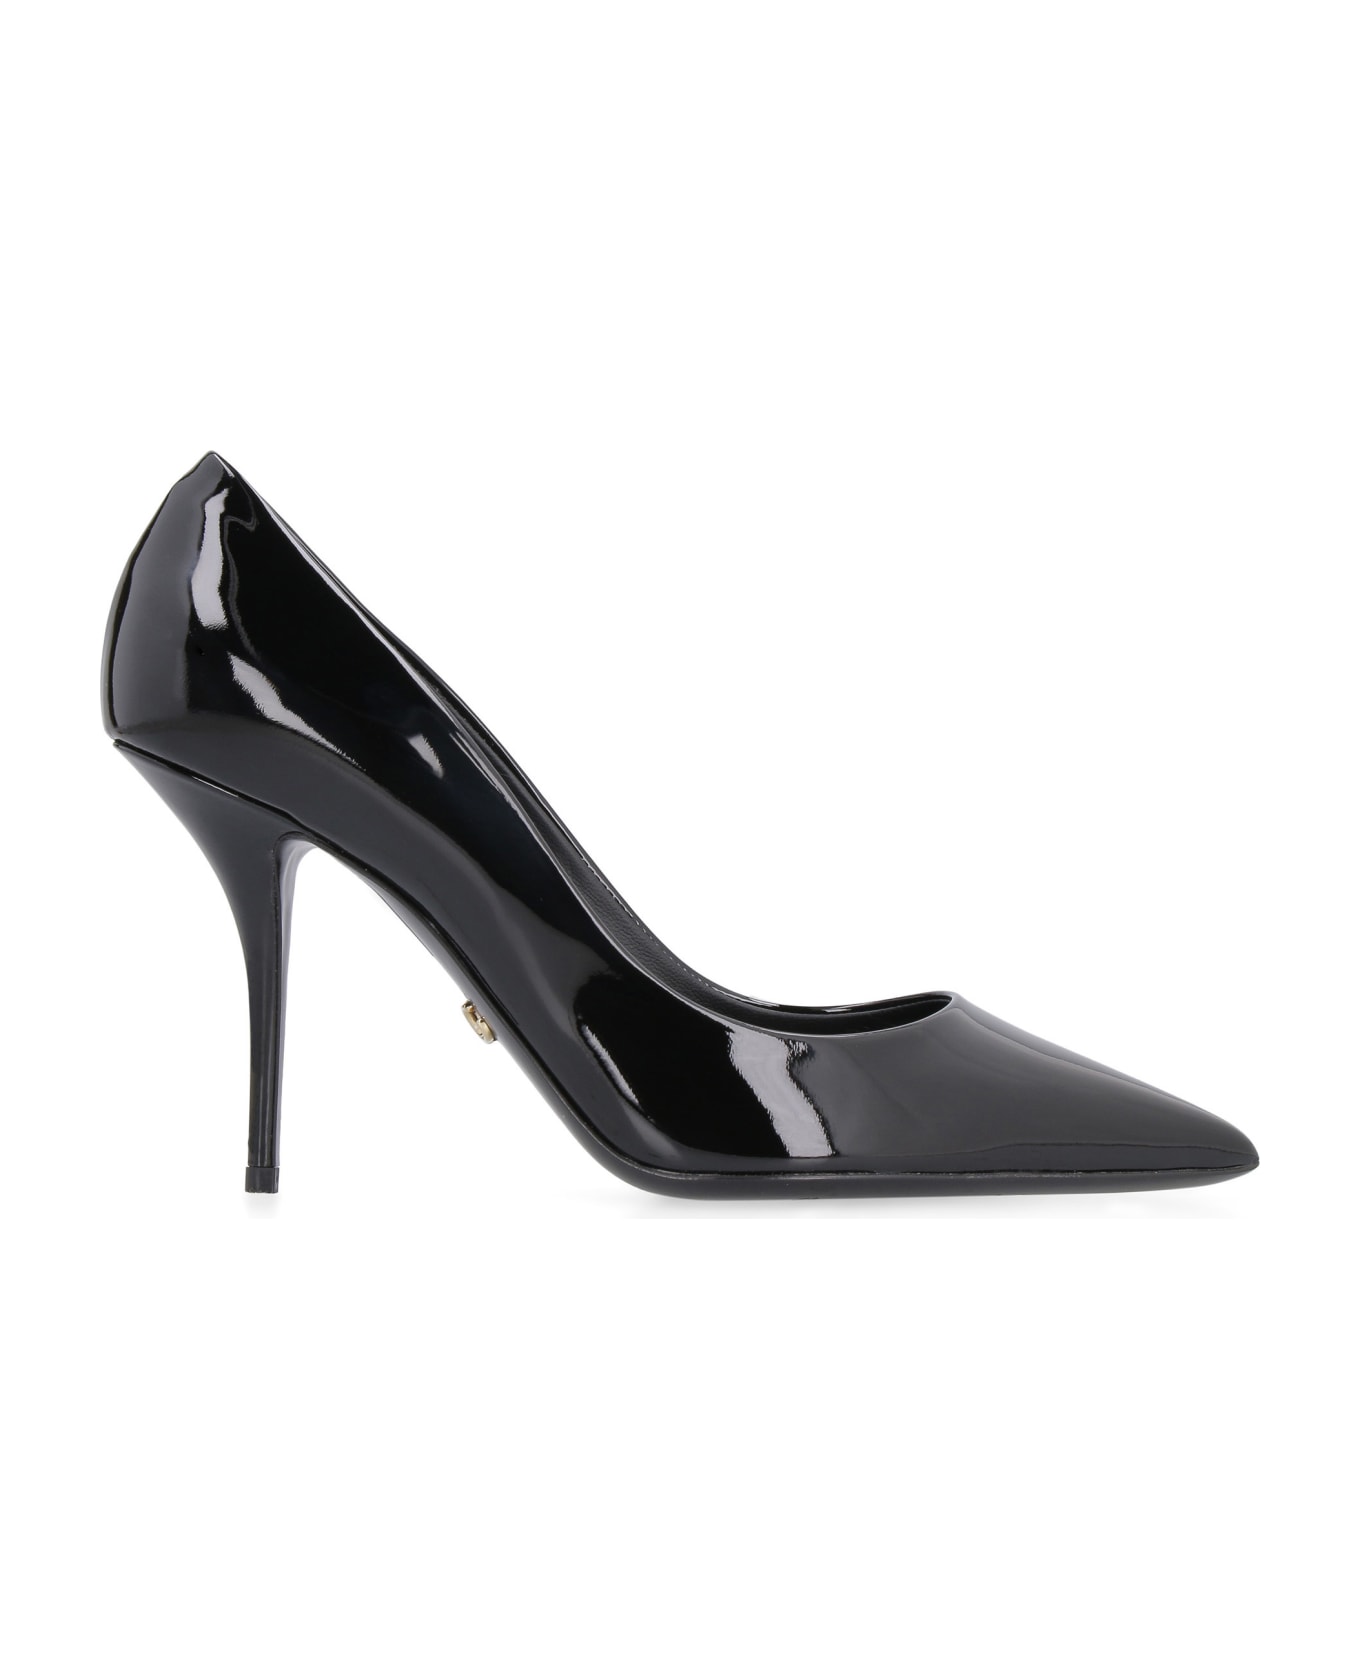 Dolce & Gabbana Patent Leather Pointy-toe Pumps - black ハイヒール